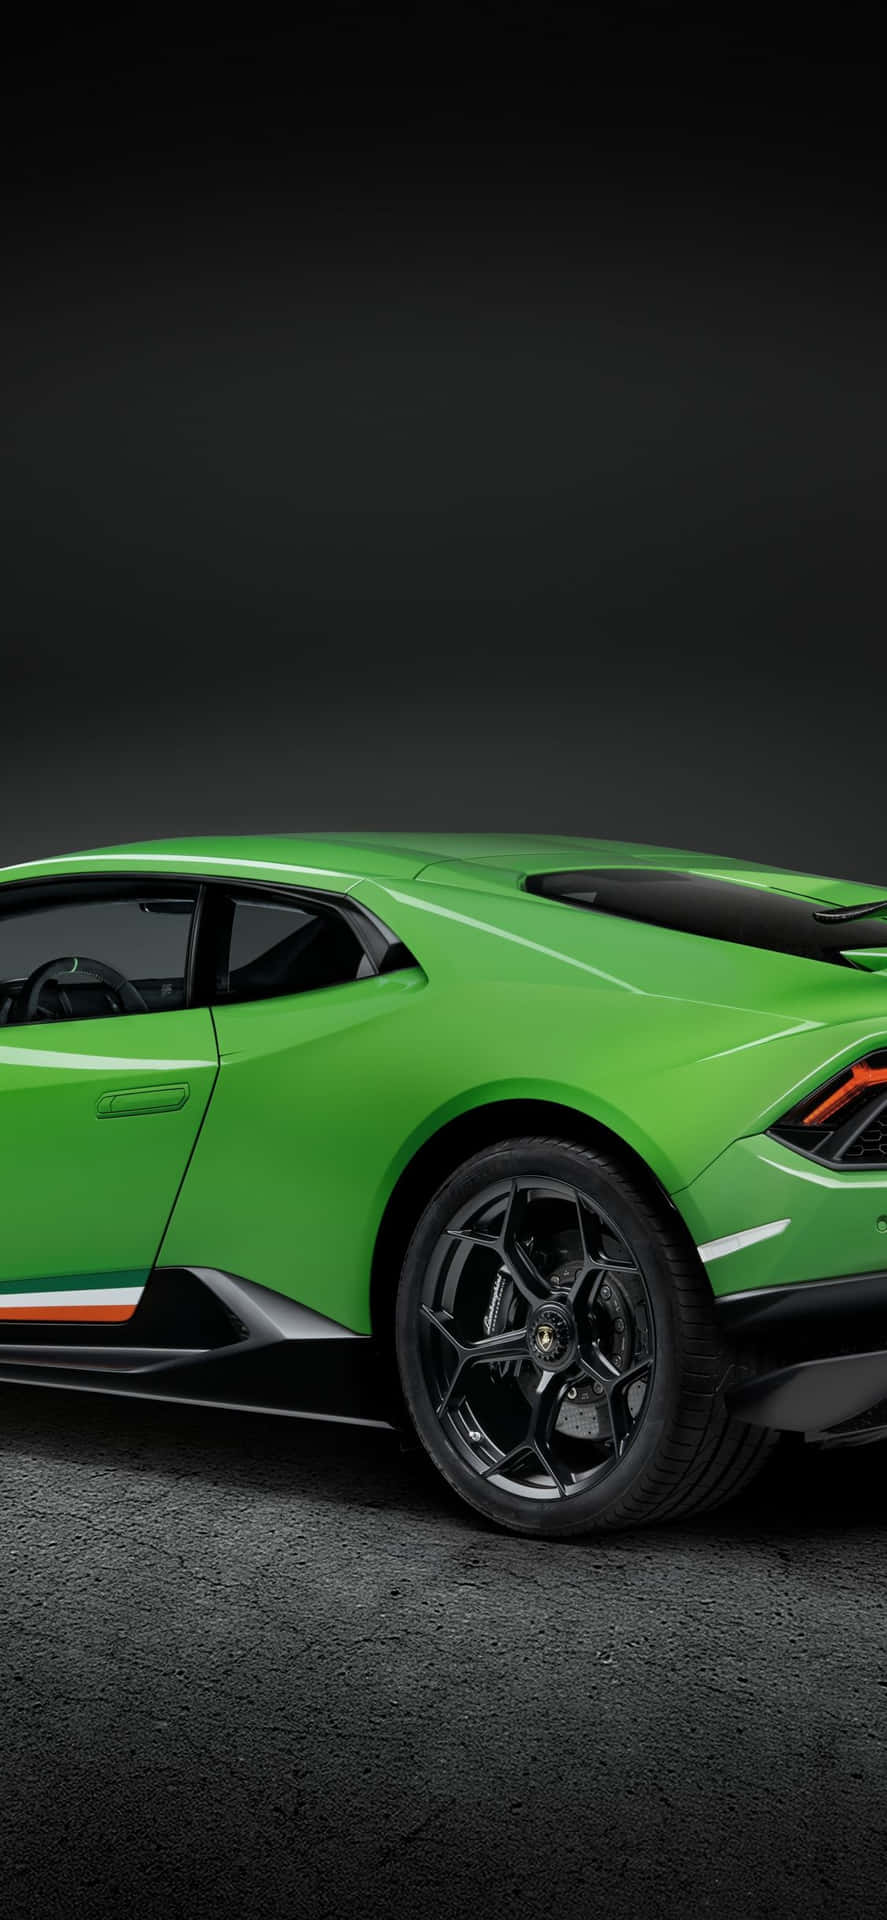 “Take a ride in style with the green Lamborghini iPhone” Wallpaper